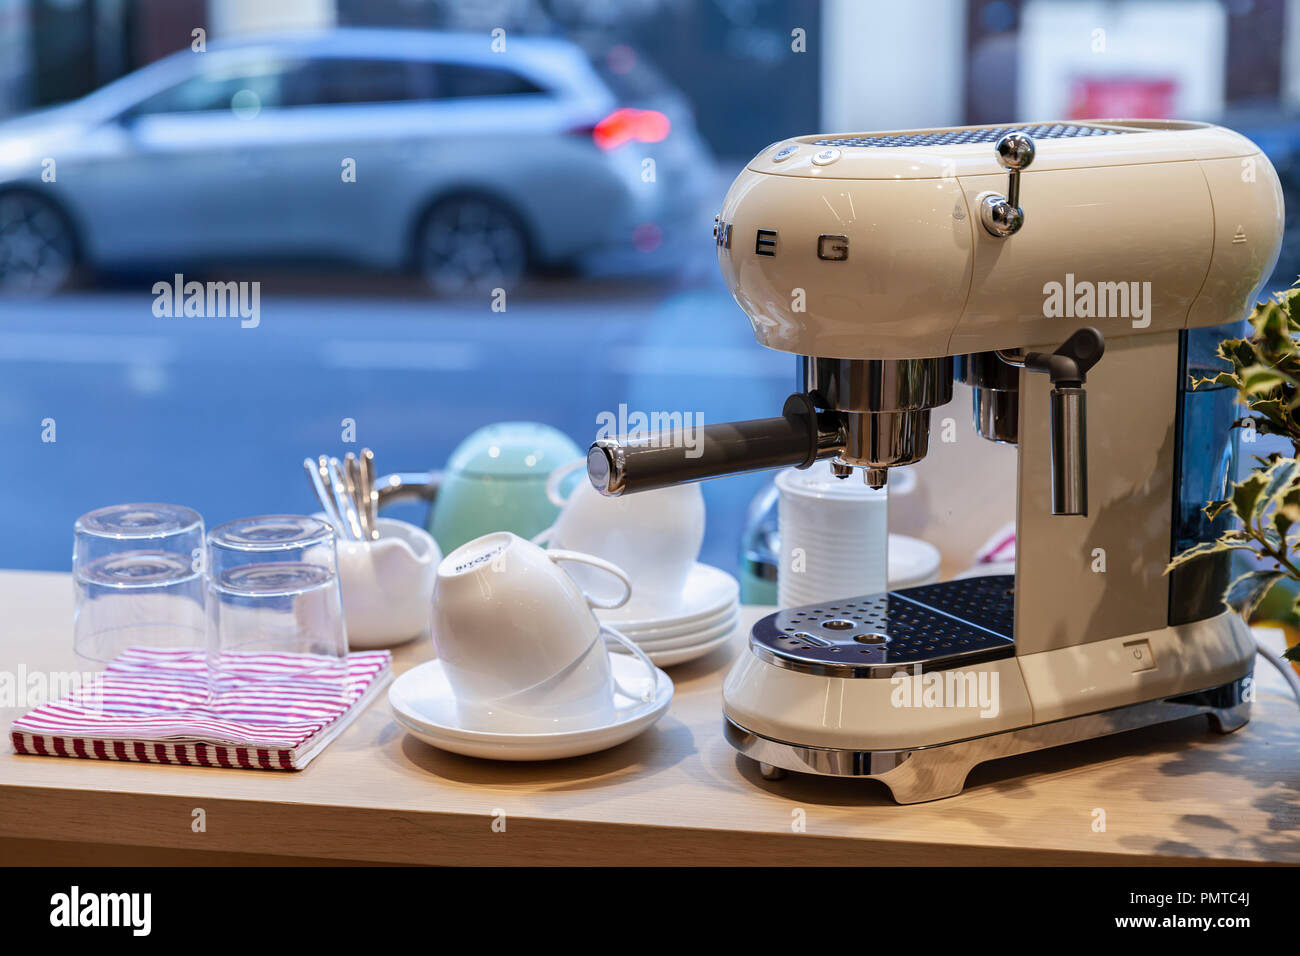 Milan, Italy - January 19, 2018: White Espresso Coffee maker by Smeg. It is  an Italian manufacturer of upmarket domestic appliances Stock Photo - Alamy